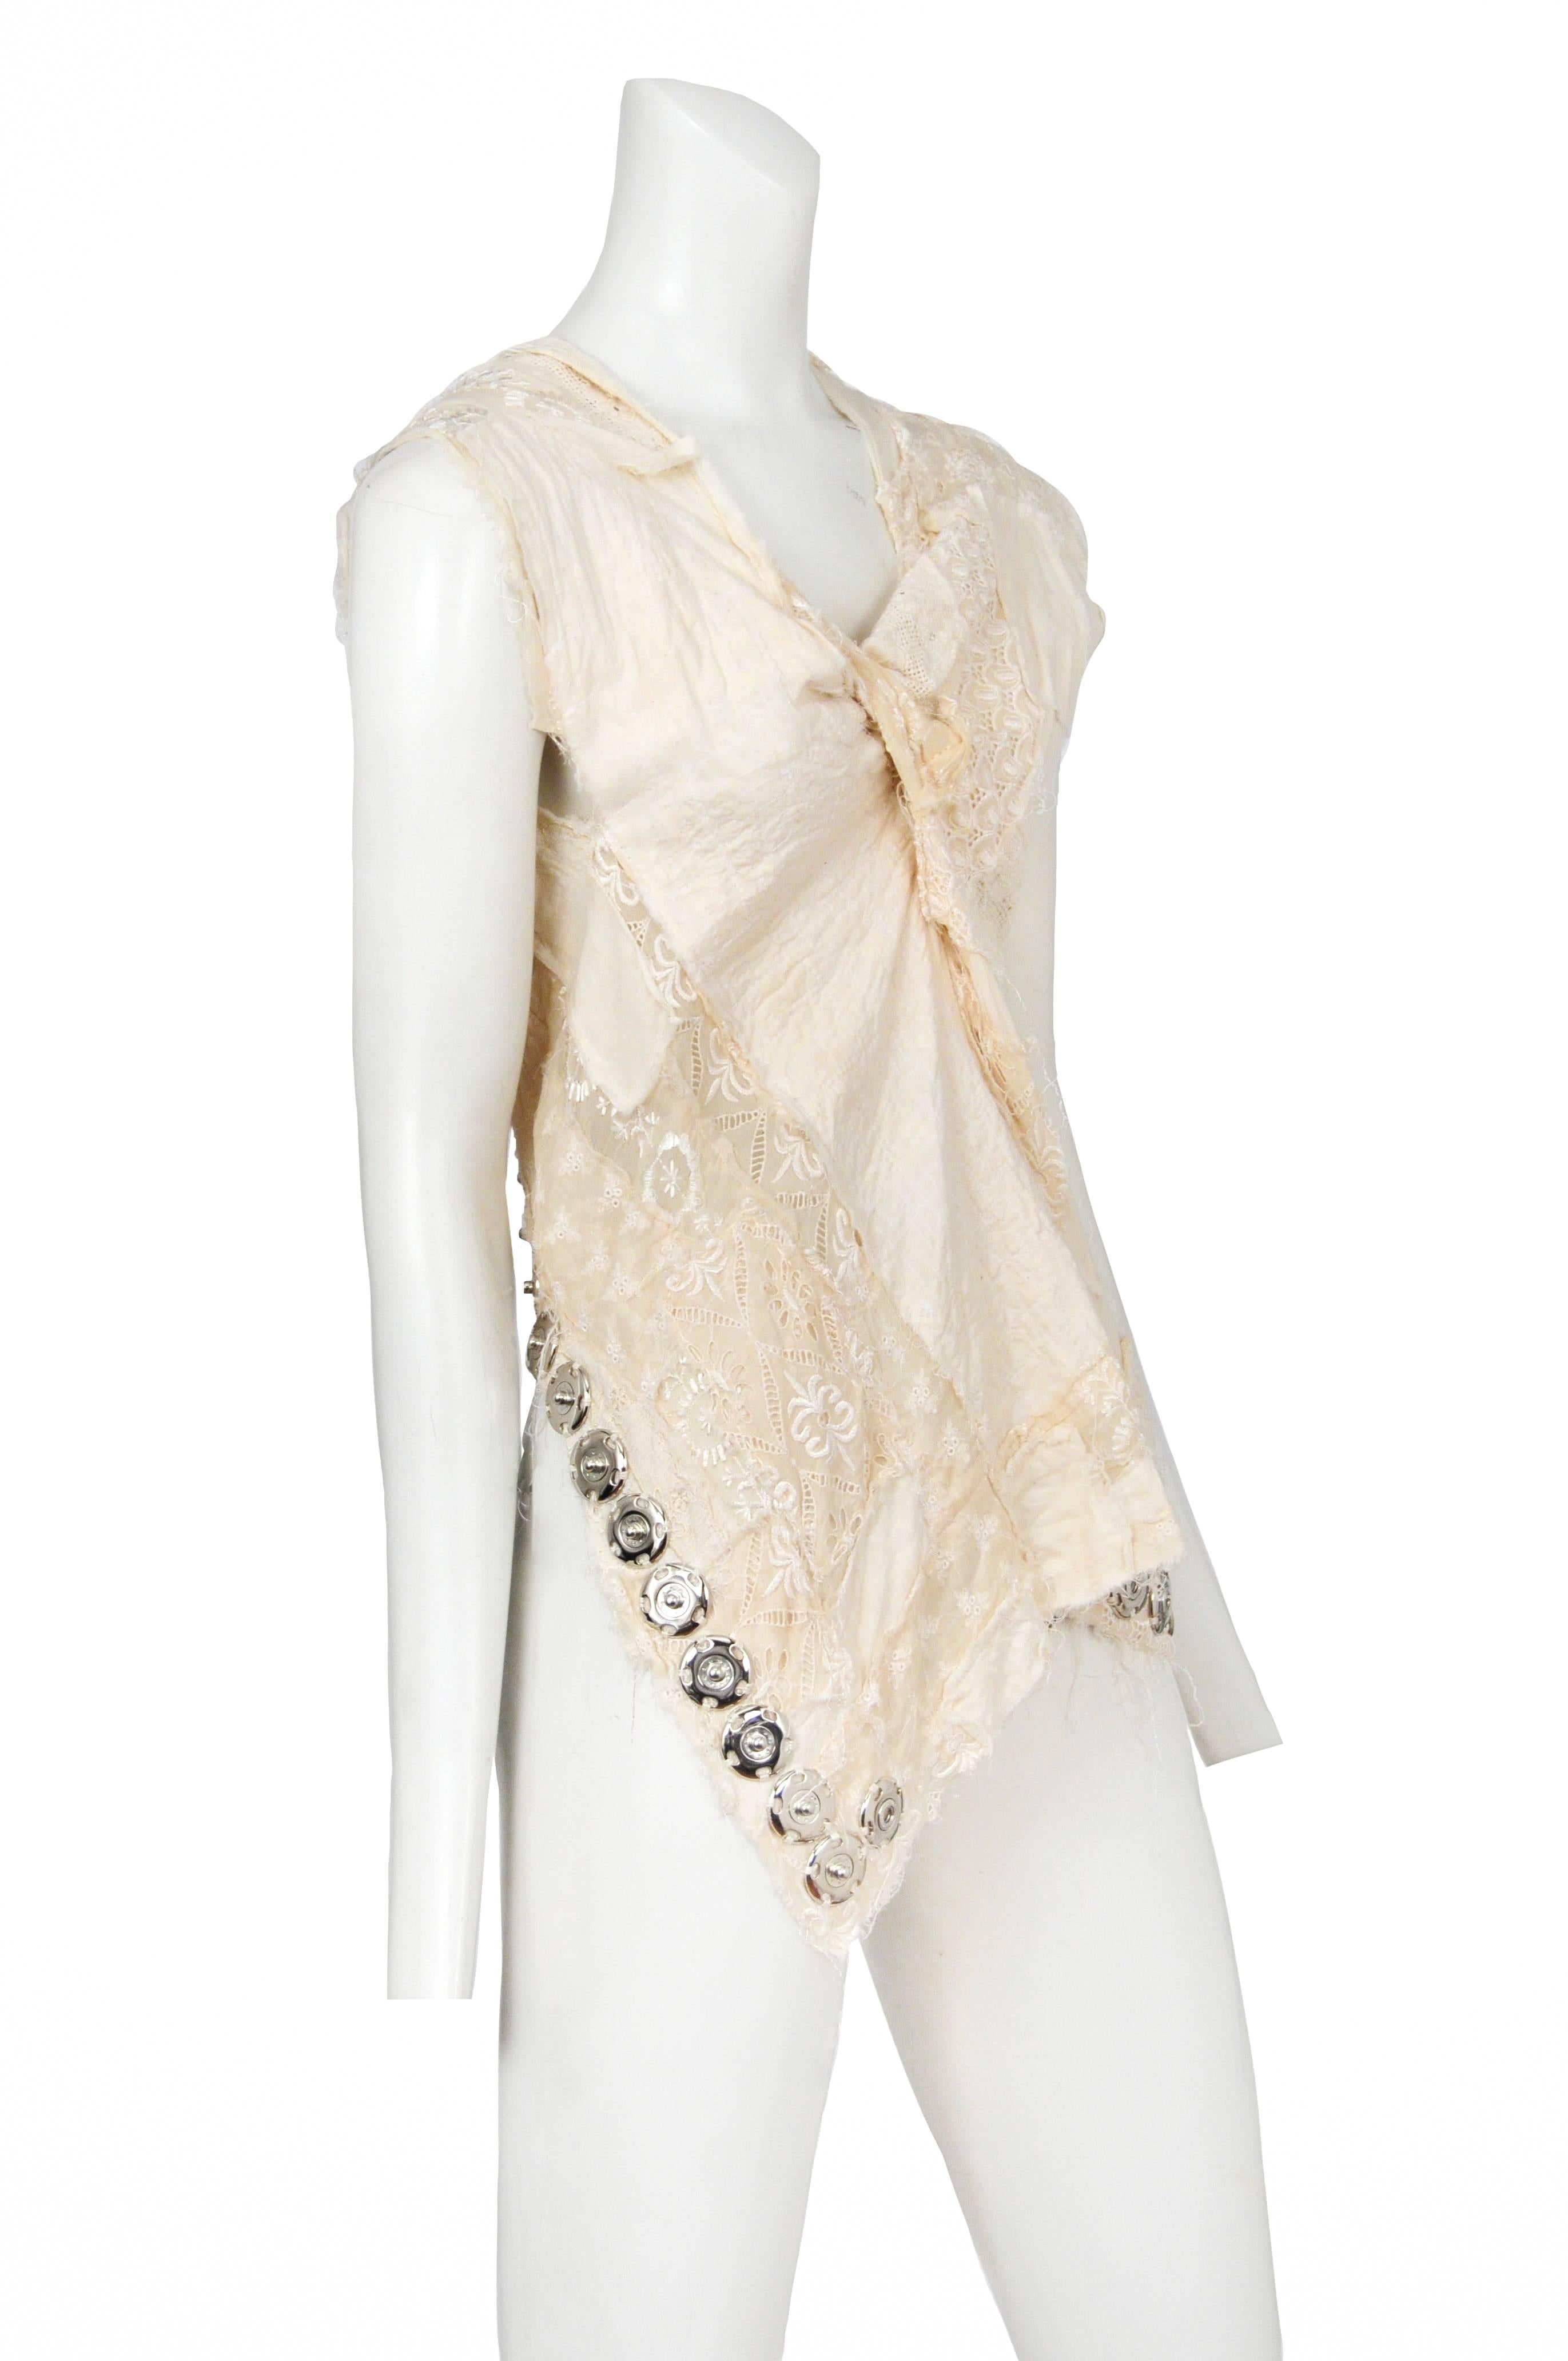 Vintage Junya Watanabe cream embroidered abstract sleeveless top featuring exposed snaps along the hem. Runway piece from the Spring 2005 Collection.